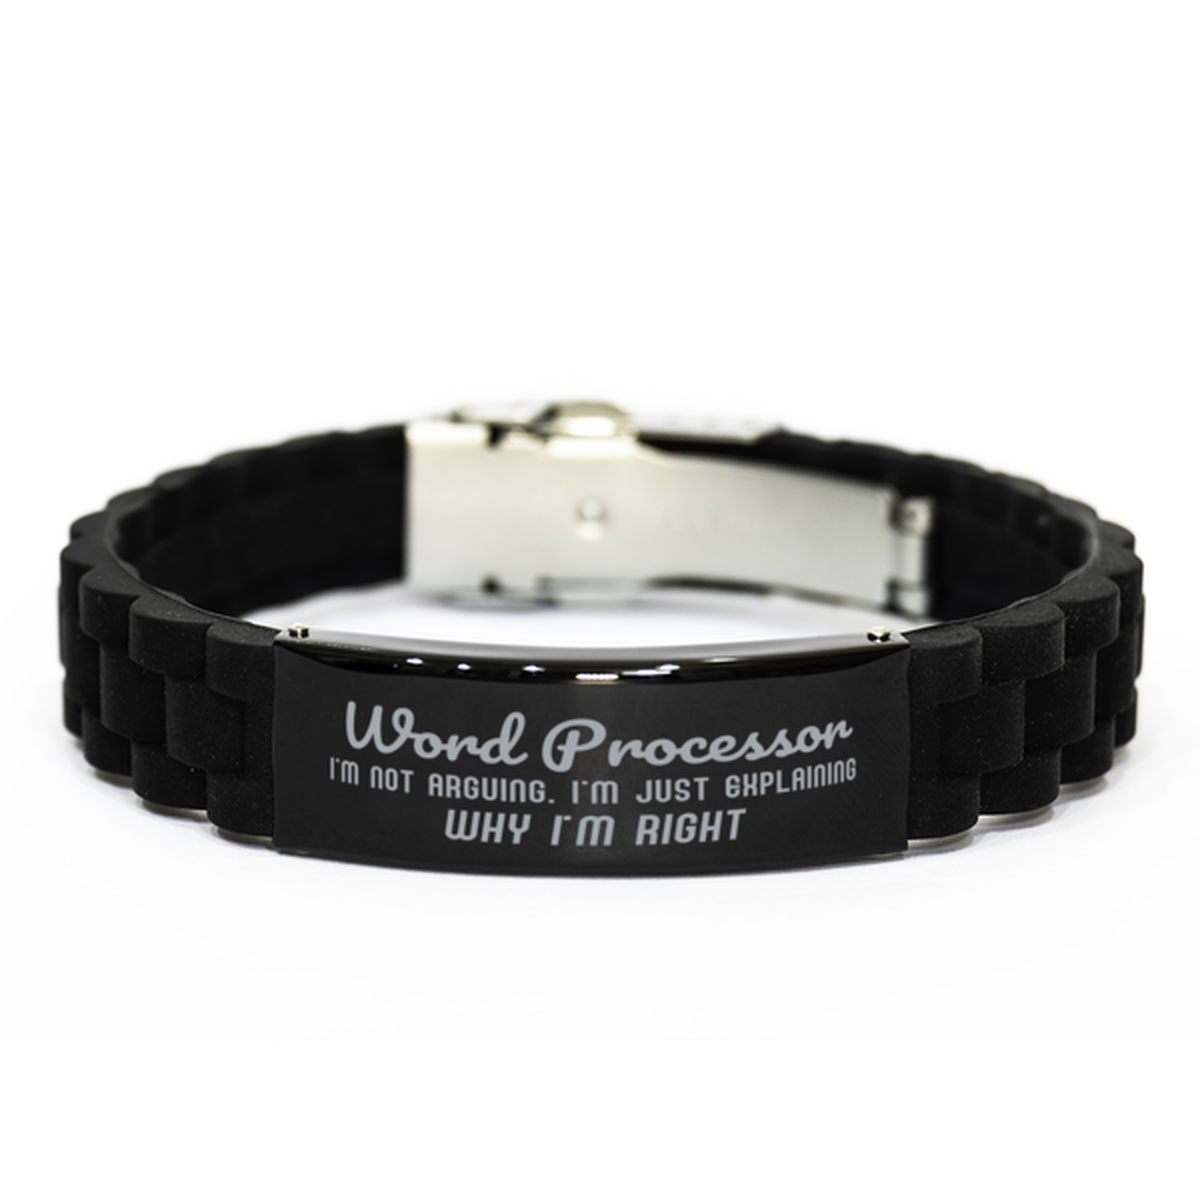 Word Processor I'm not Arguing. I'm Just Explaining Why I'm RIGHT Black Glidelock Clasp Bracelet, Funny Saying Quote Word Processor Gifts For Word Processor Graduation Birthday Christmas Gifts for Men Women Coworker